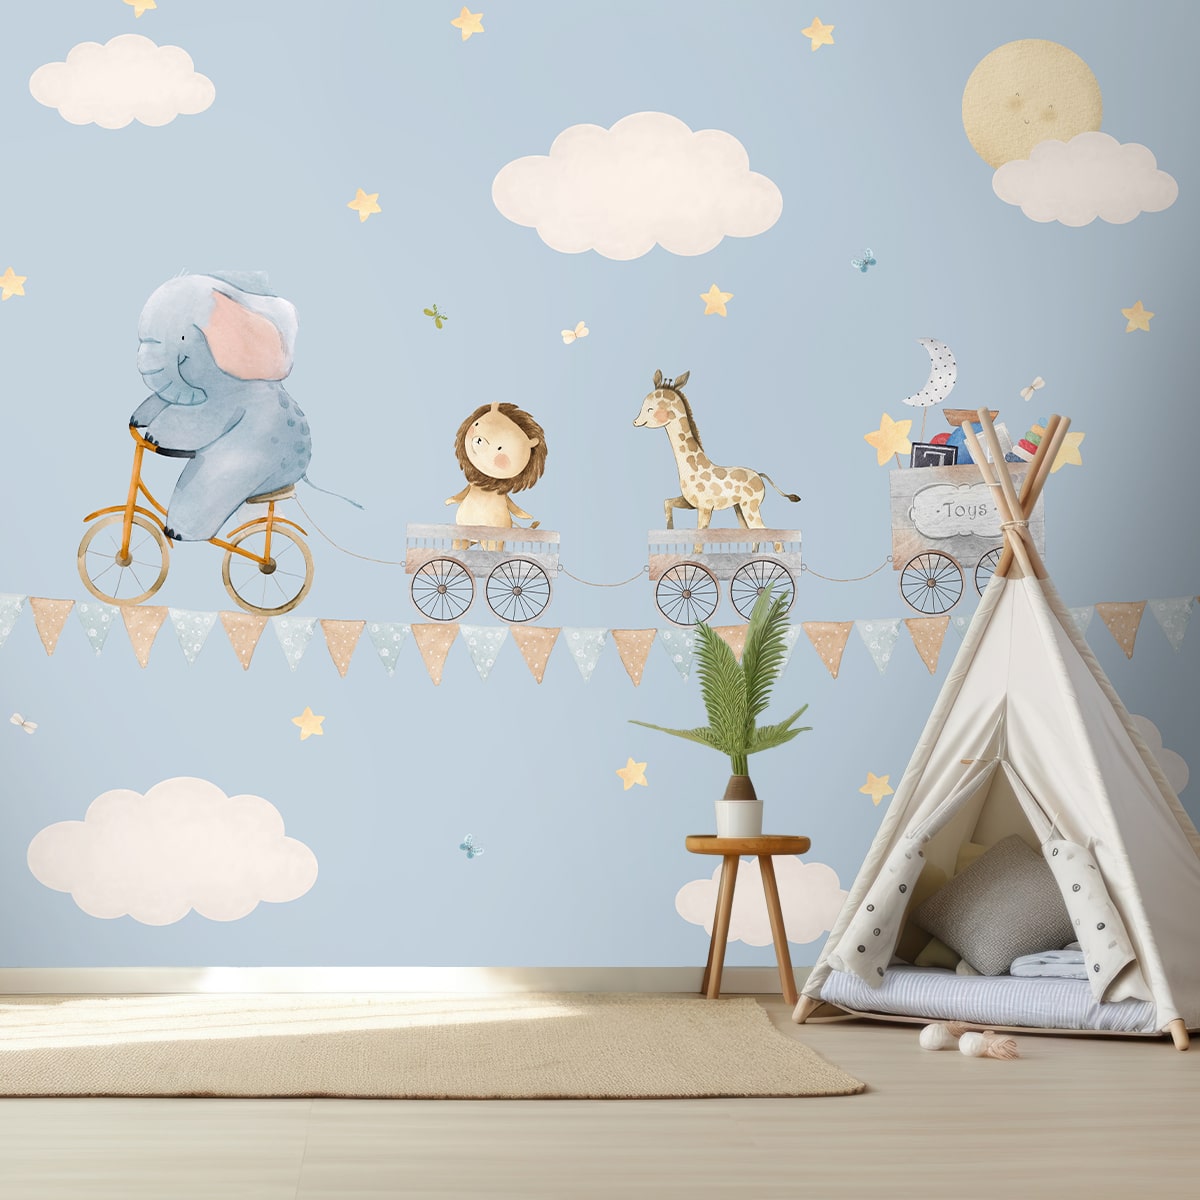 Animals On Ride: Wallpaper for Kids Room, Blue